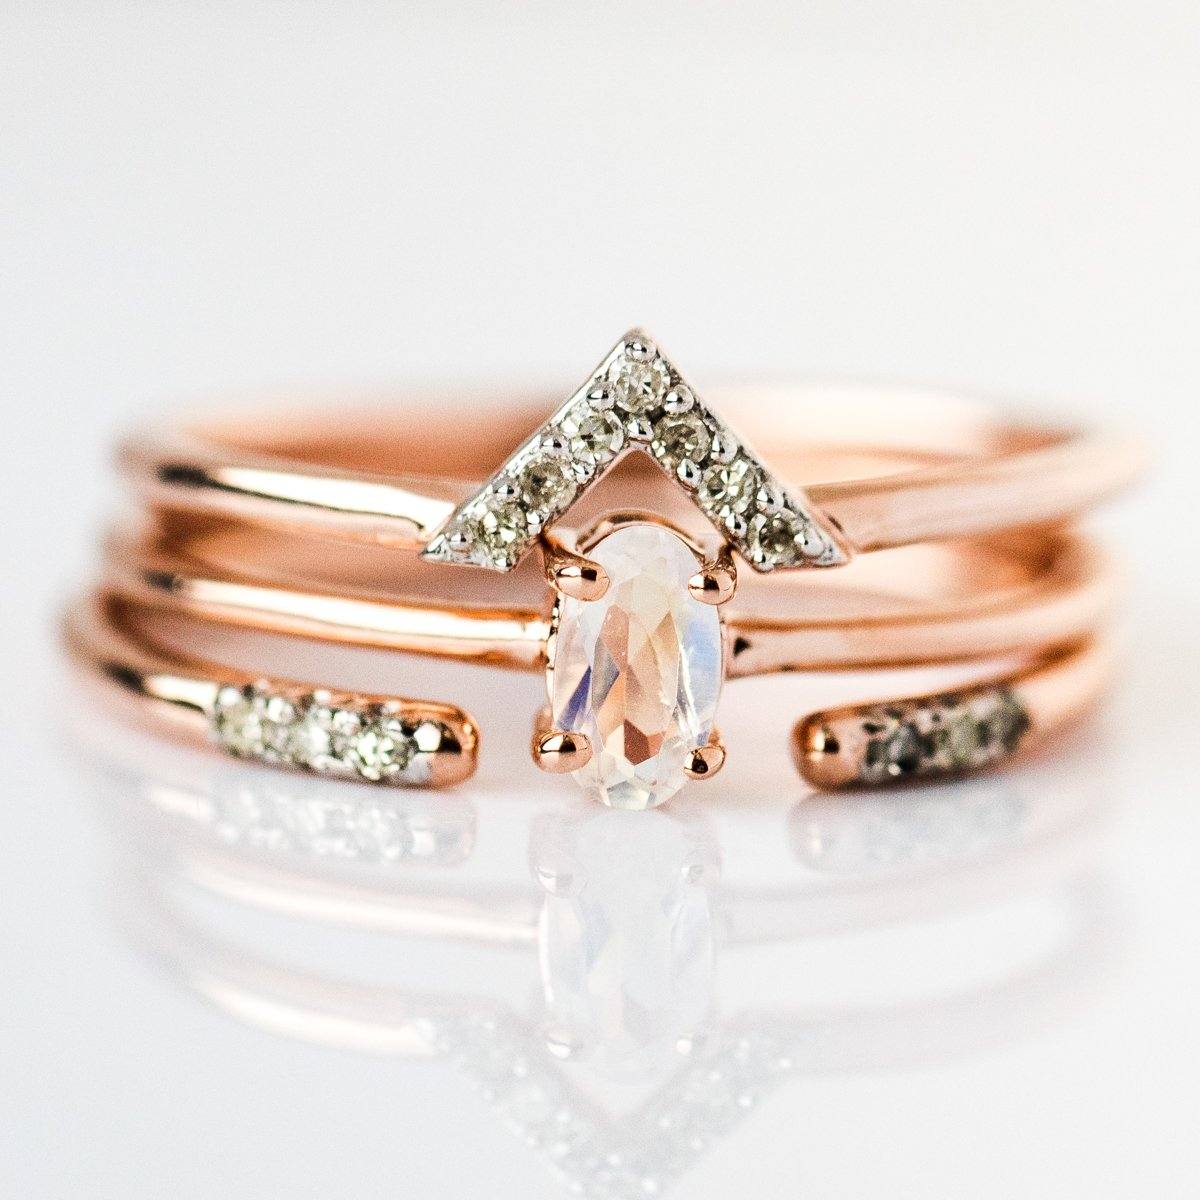 local eclectic Diamond & Moonstone Stacking Ring Set